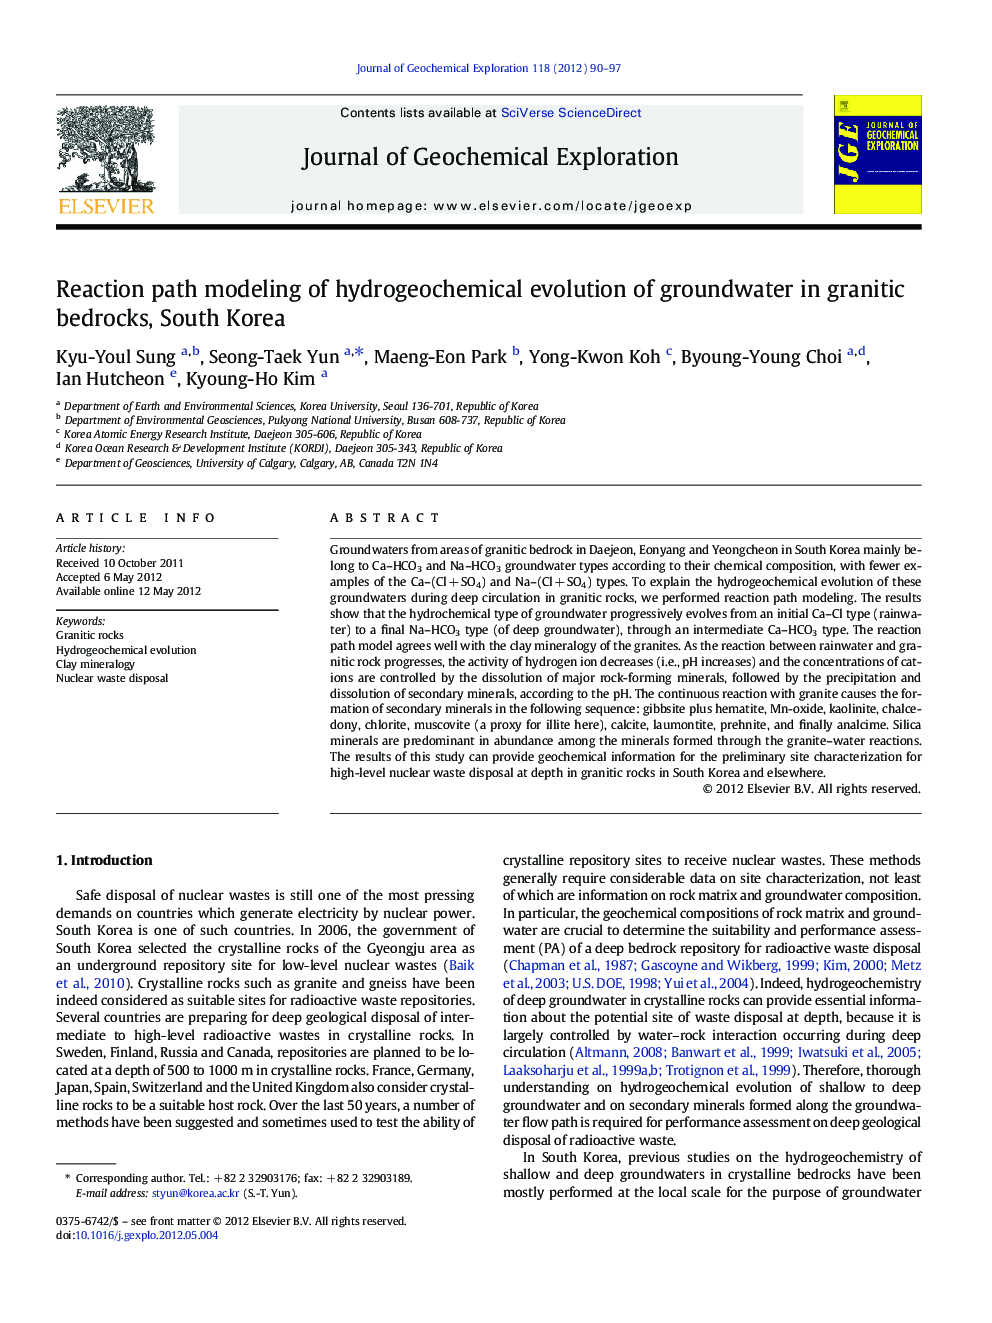 Reaction path modeling of hydrogeochemical evolution of groundwater in granitic bedrocks, South Korea